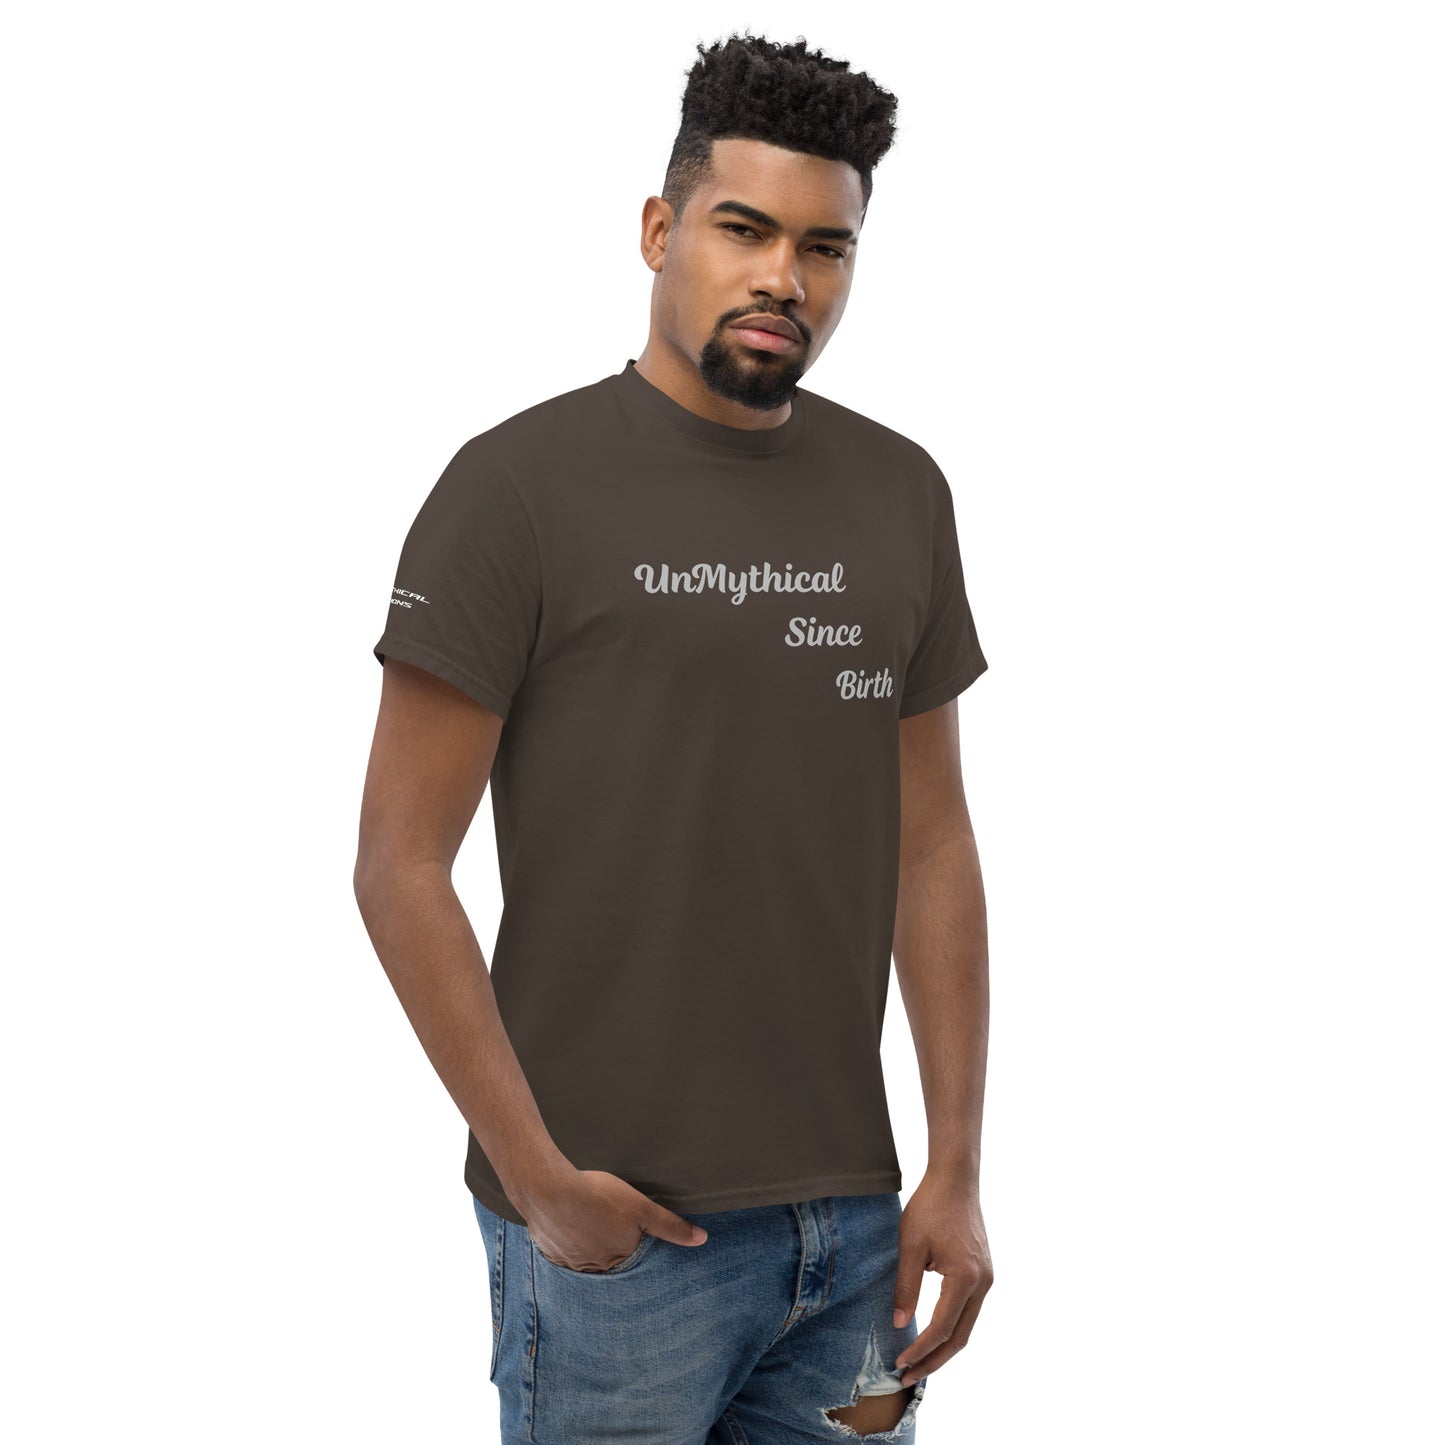 Men's classic tee UnMythical Birth